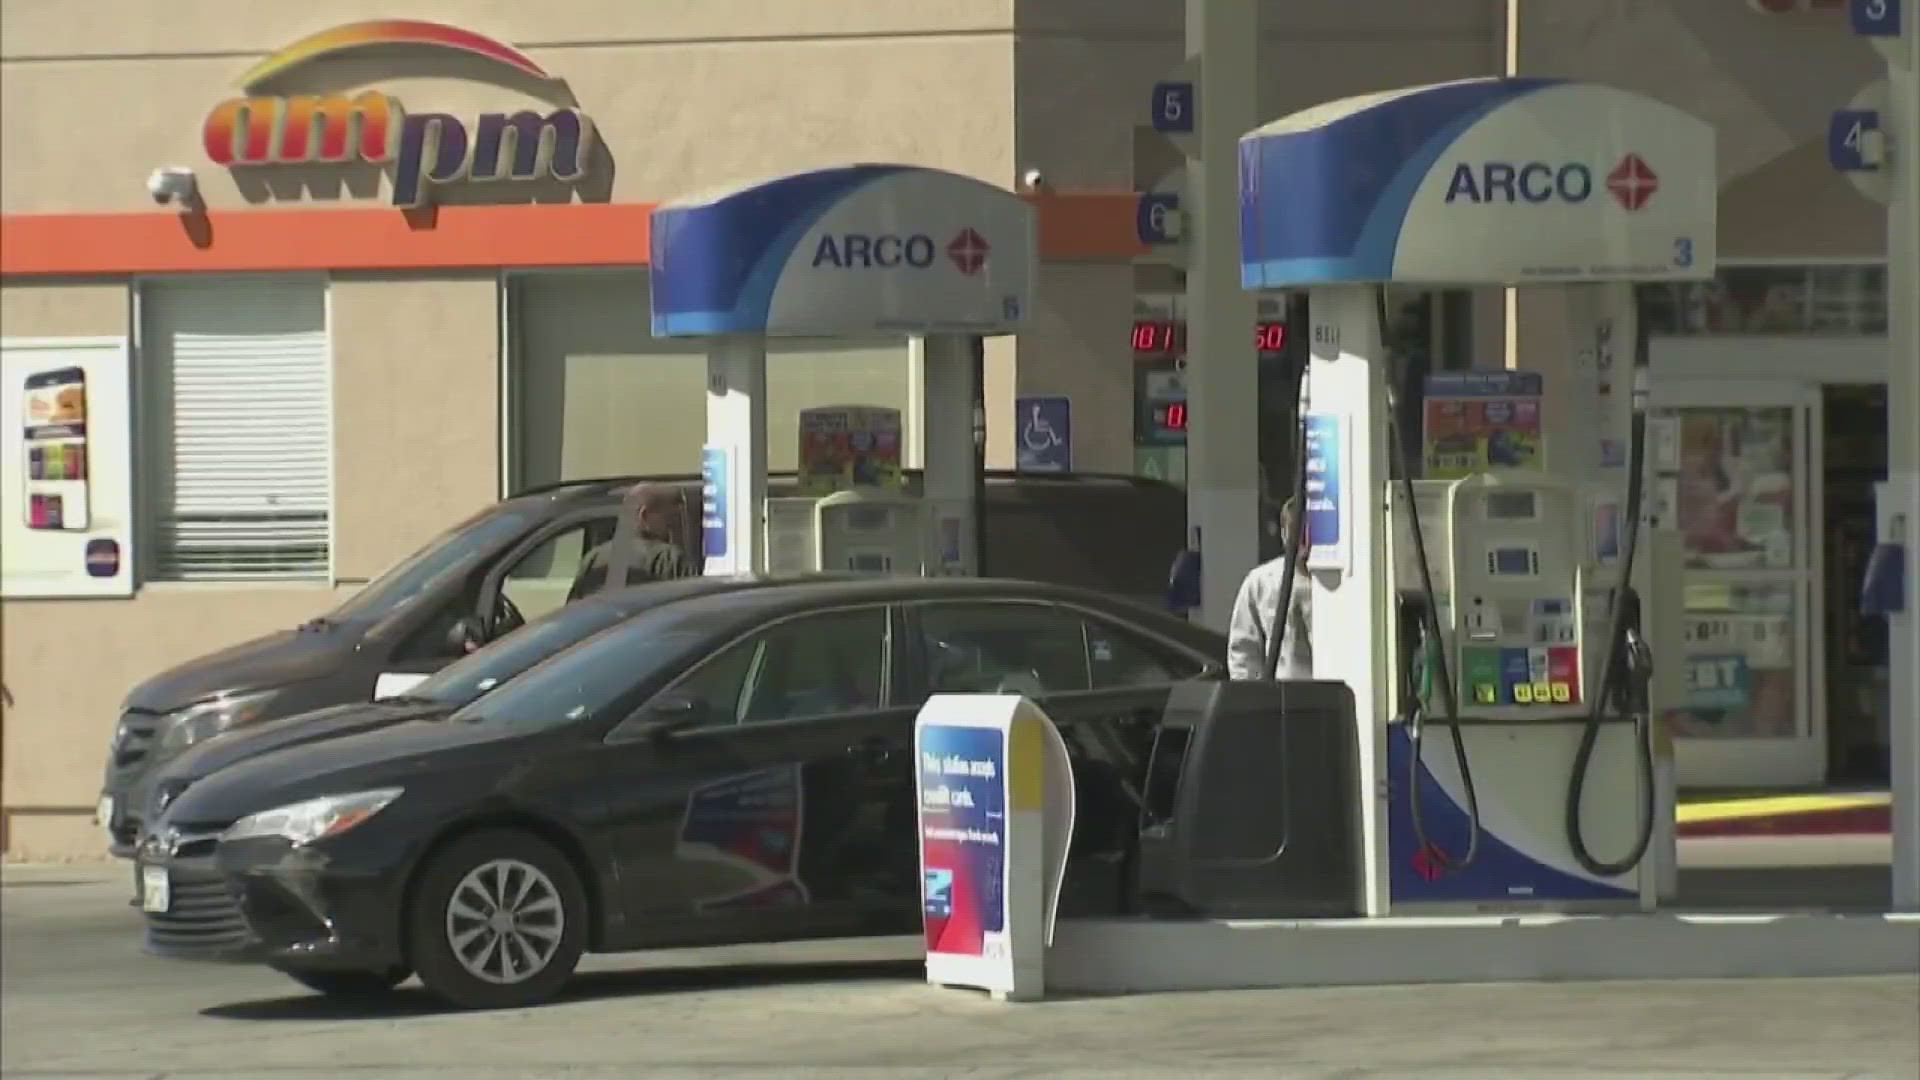 California lawmakers on Thursday will vote on whether to allow penalties on oil companies for price gouging at the pump.